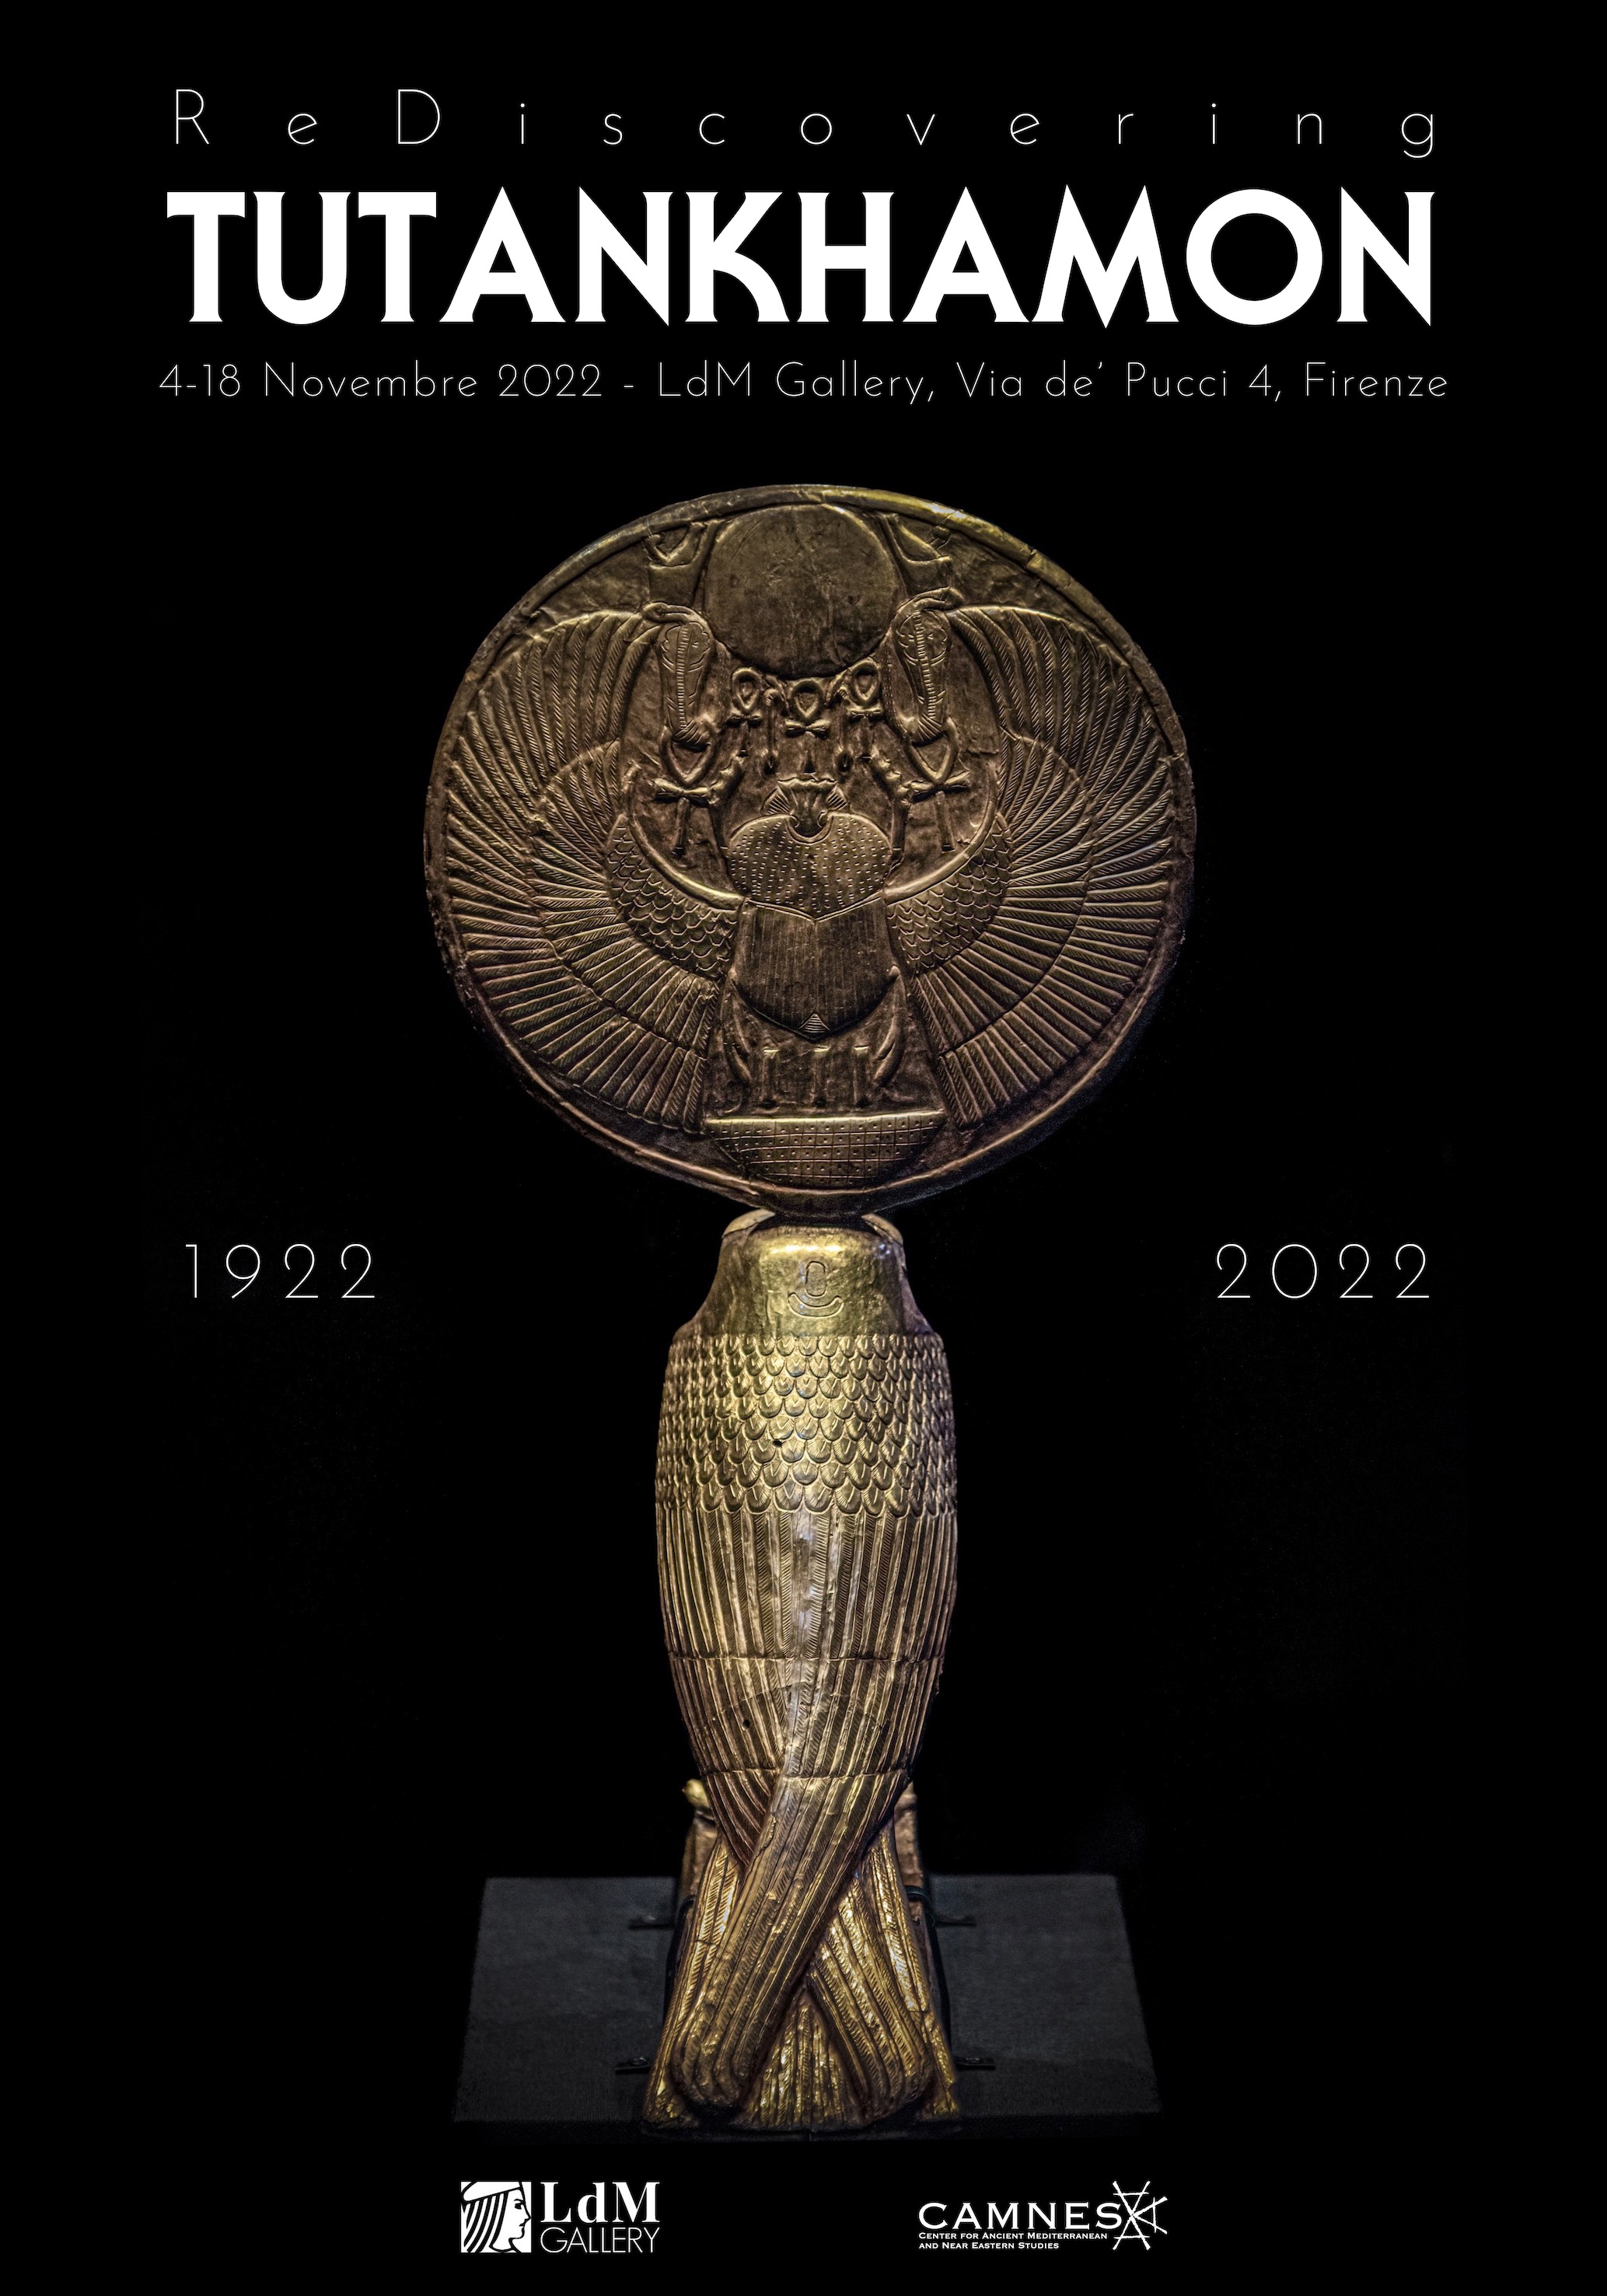 TUTANKHAMON: An exhibition and a book on the occasion of the centenary of the discovery